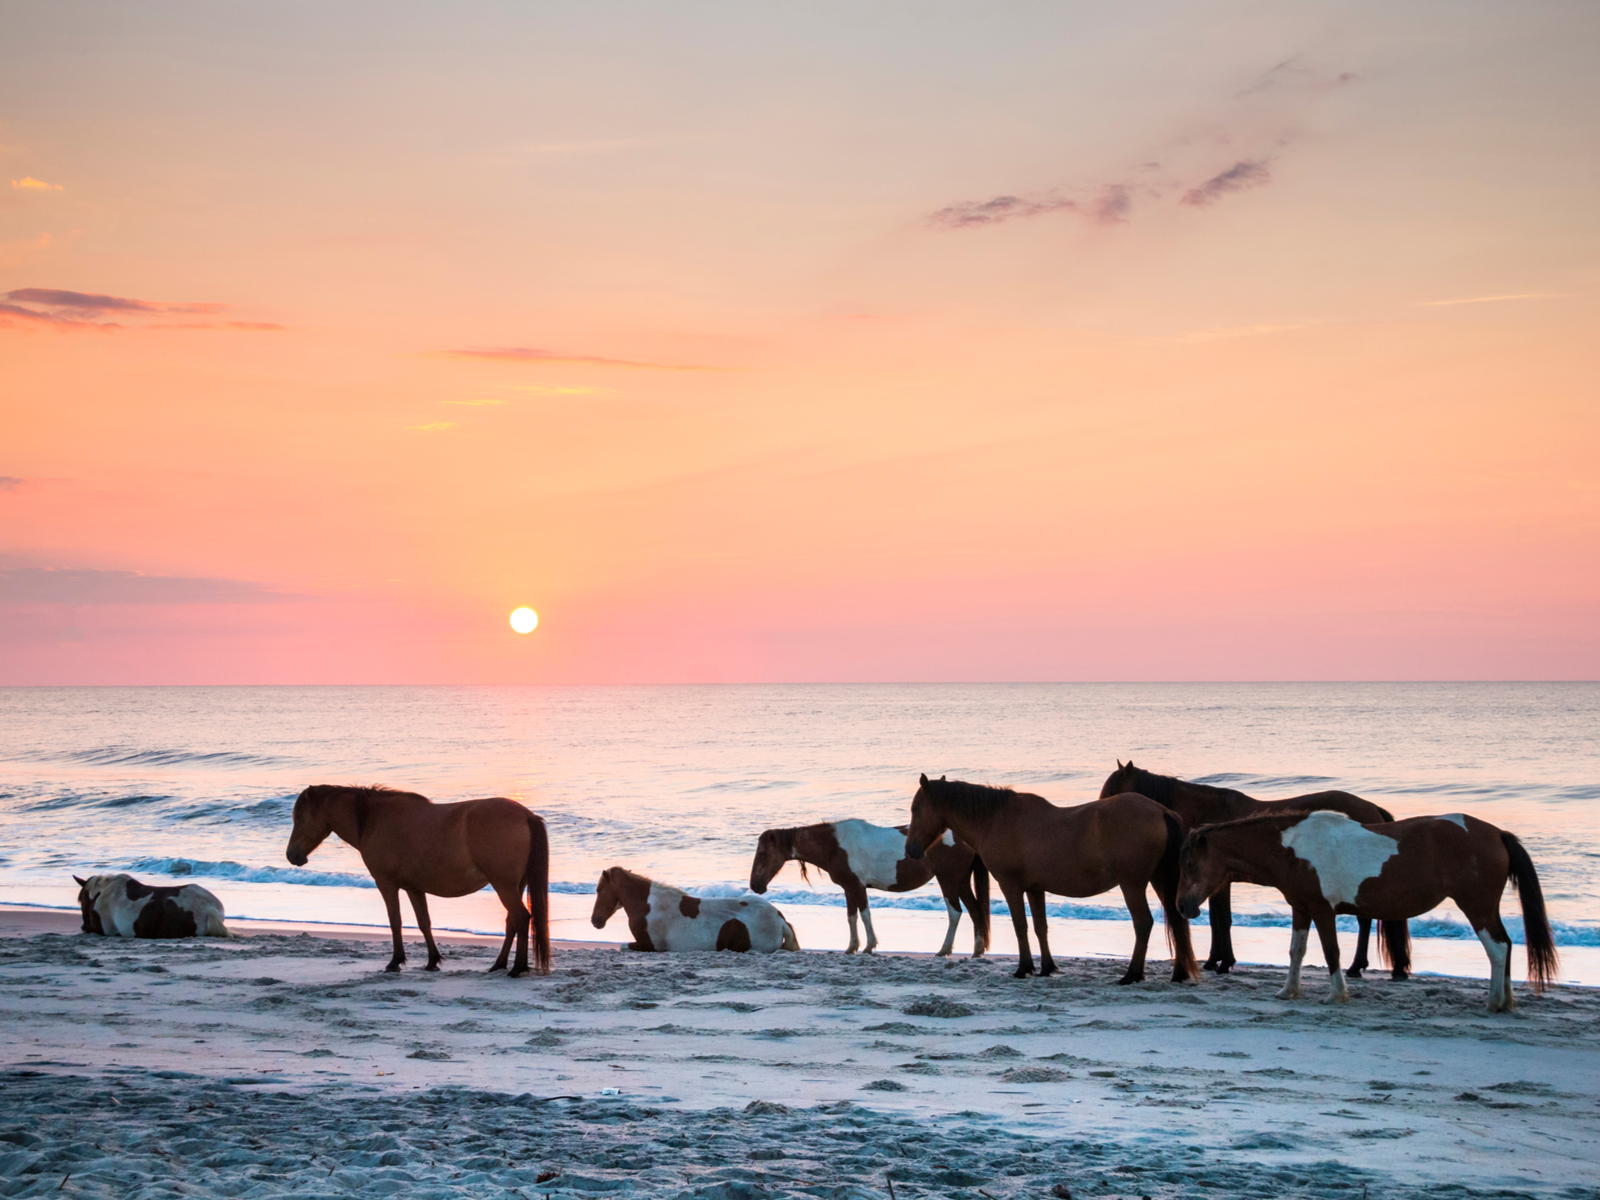 Wild horses roaming the beach at Assateague Island on sunrise, a piece on the best beaches in the US